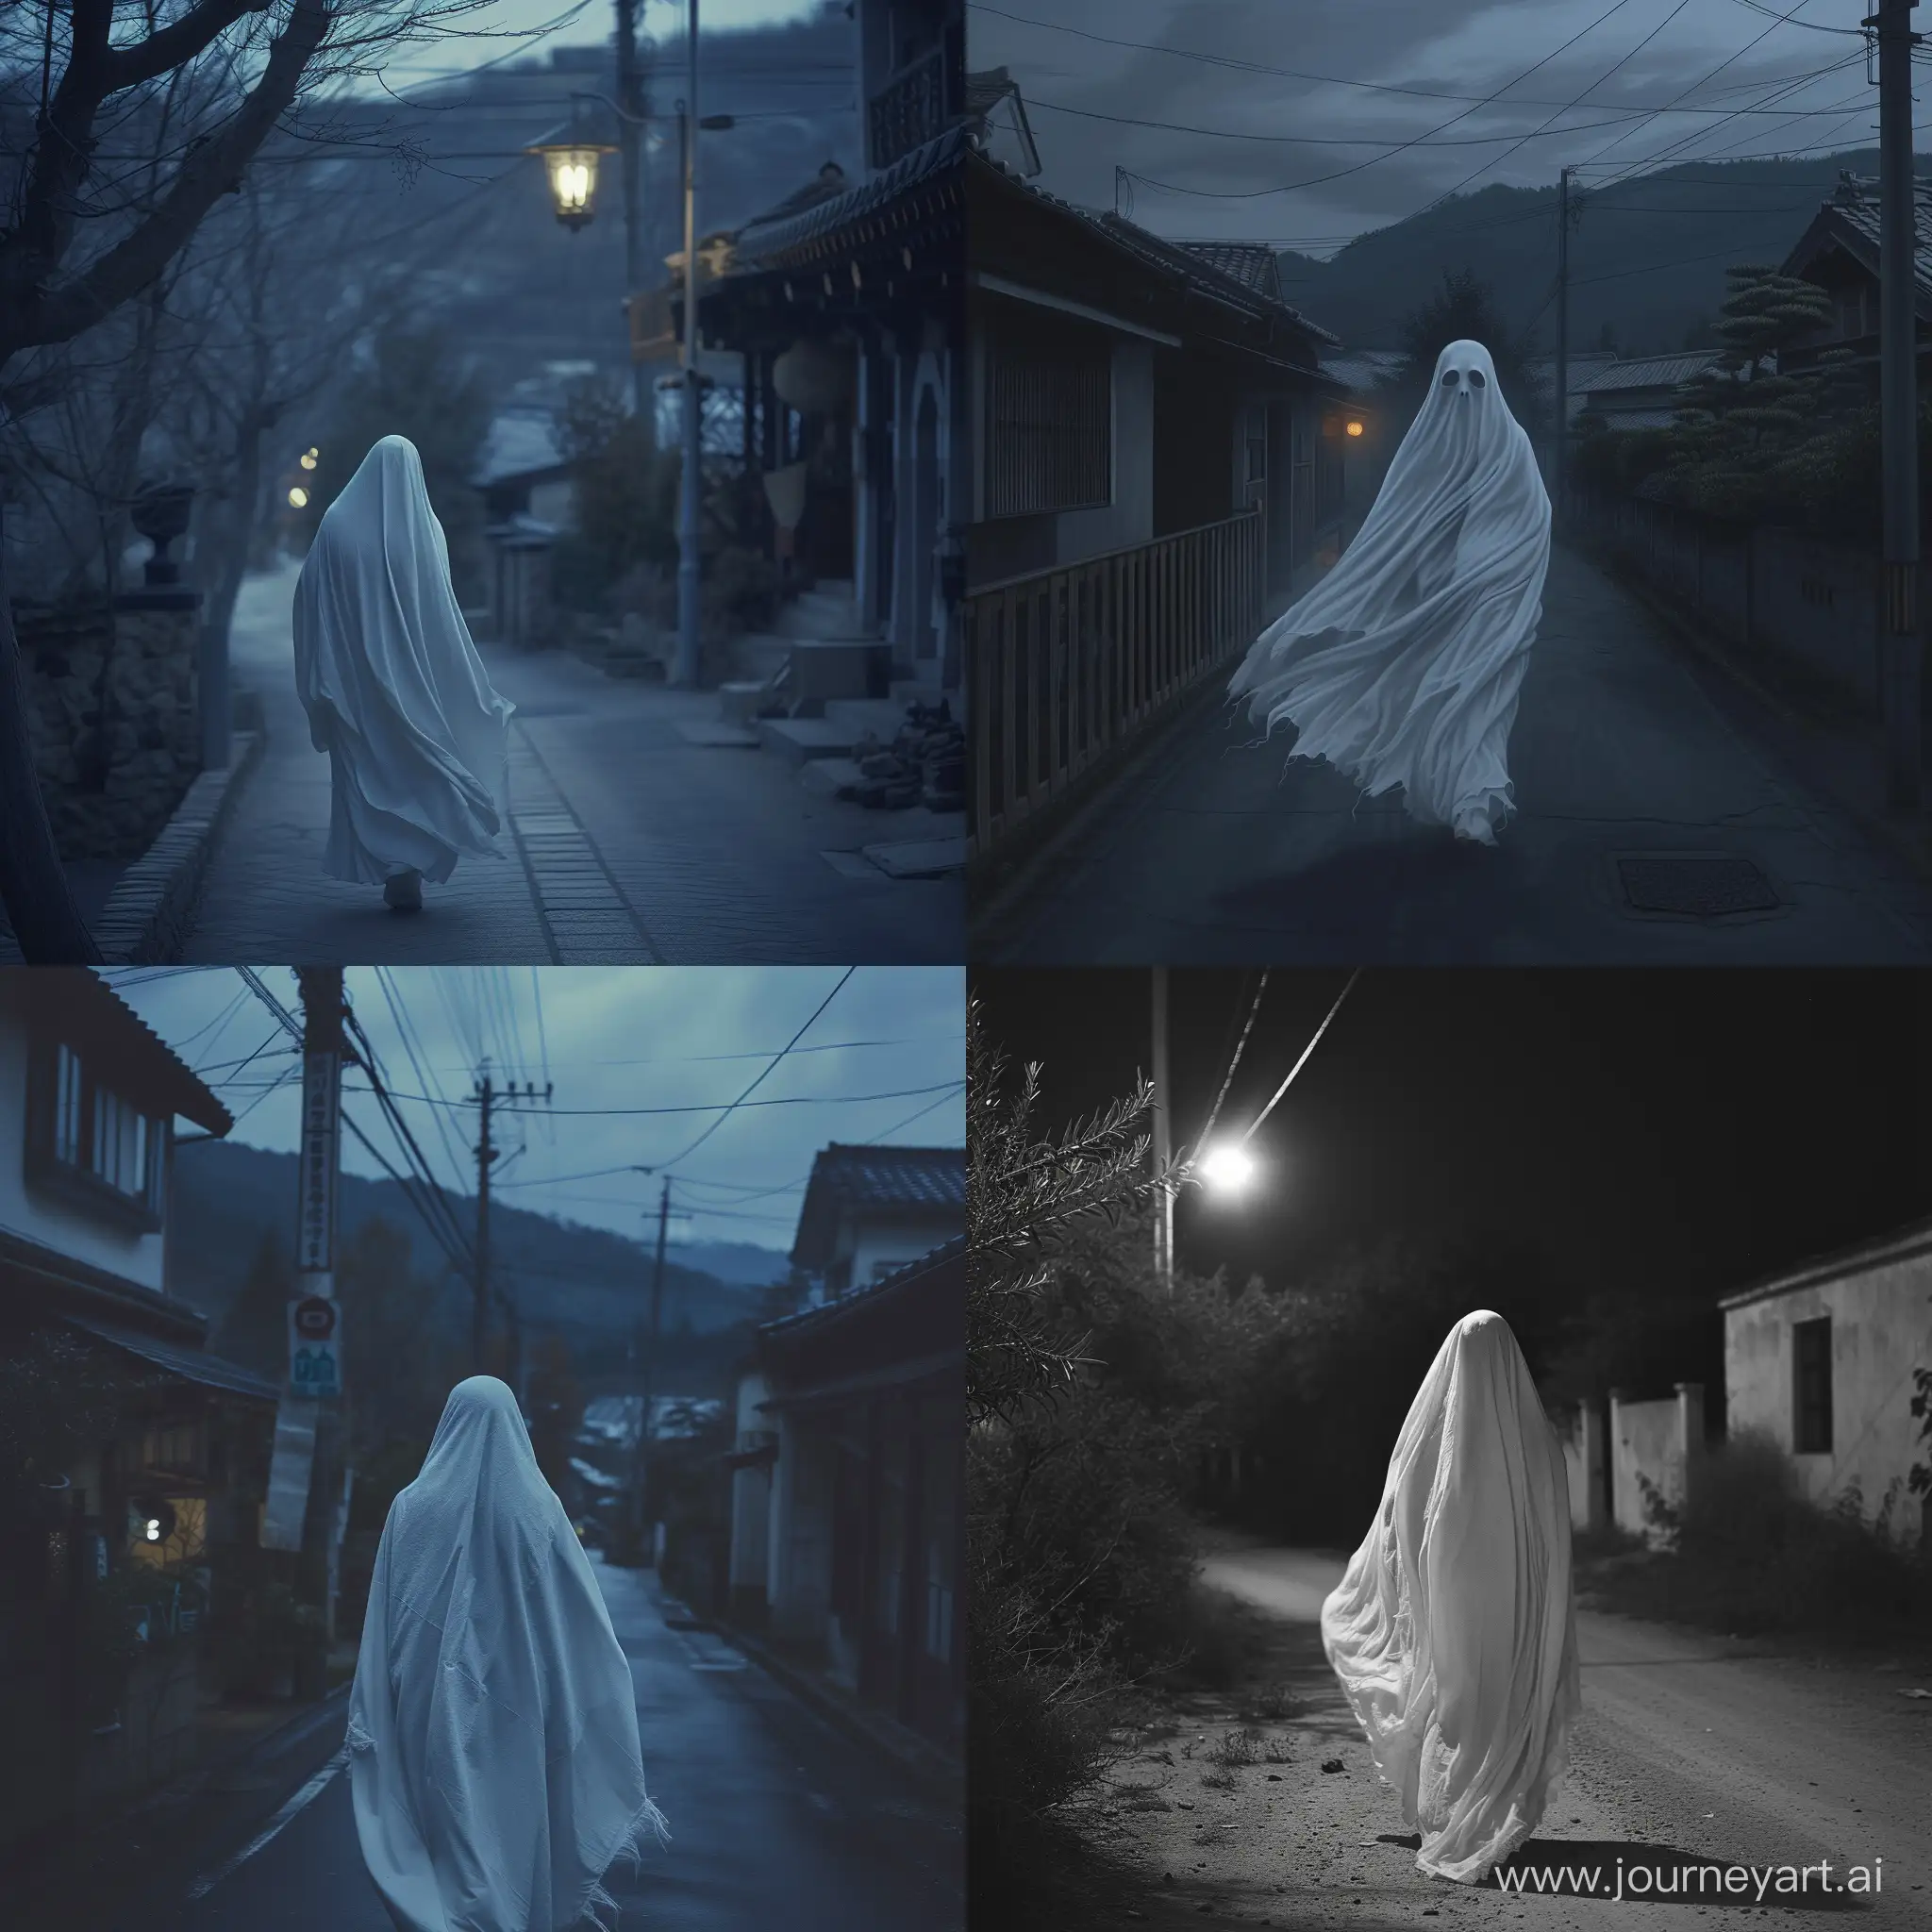 Ethereal-Night-Stroll-Ghostly-Girl-in-White-Shroud-Gliding-through-Village-Streets